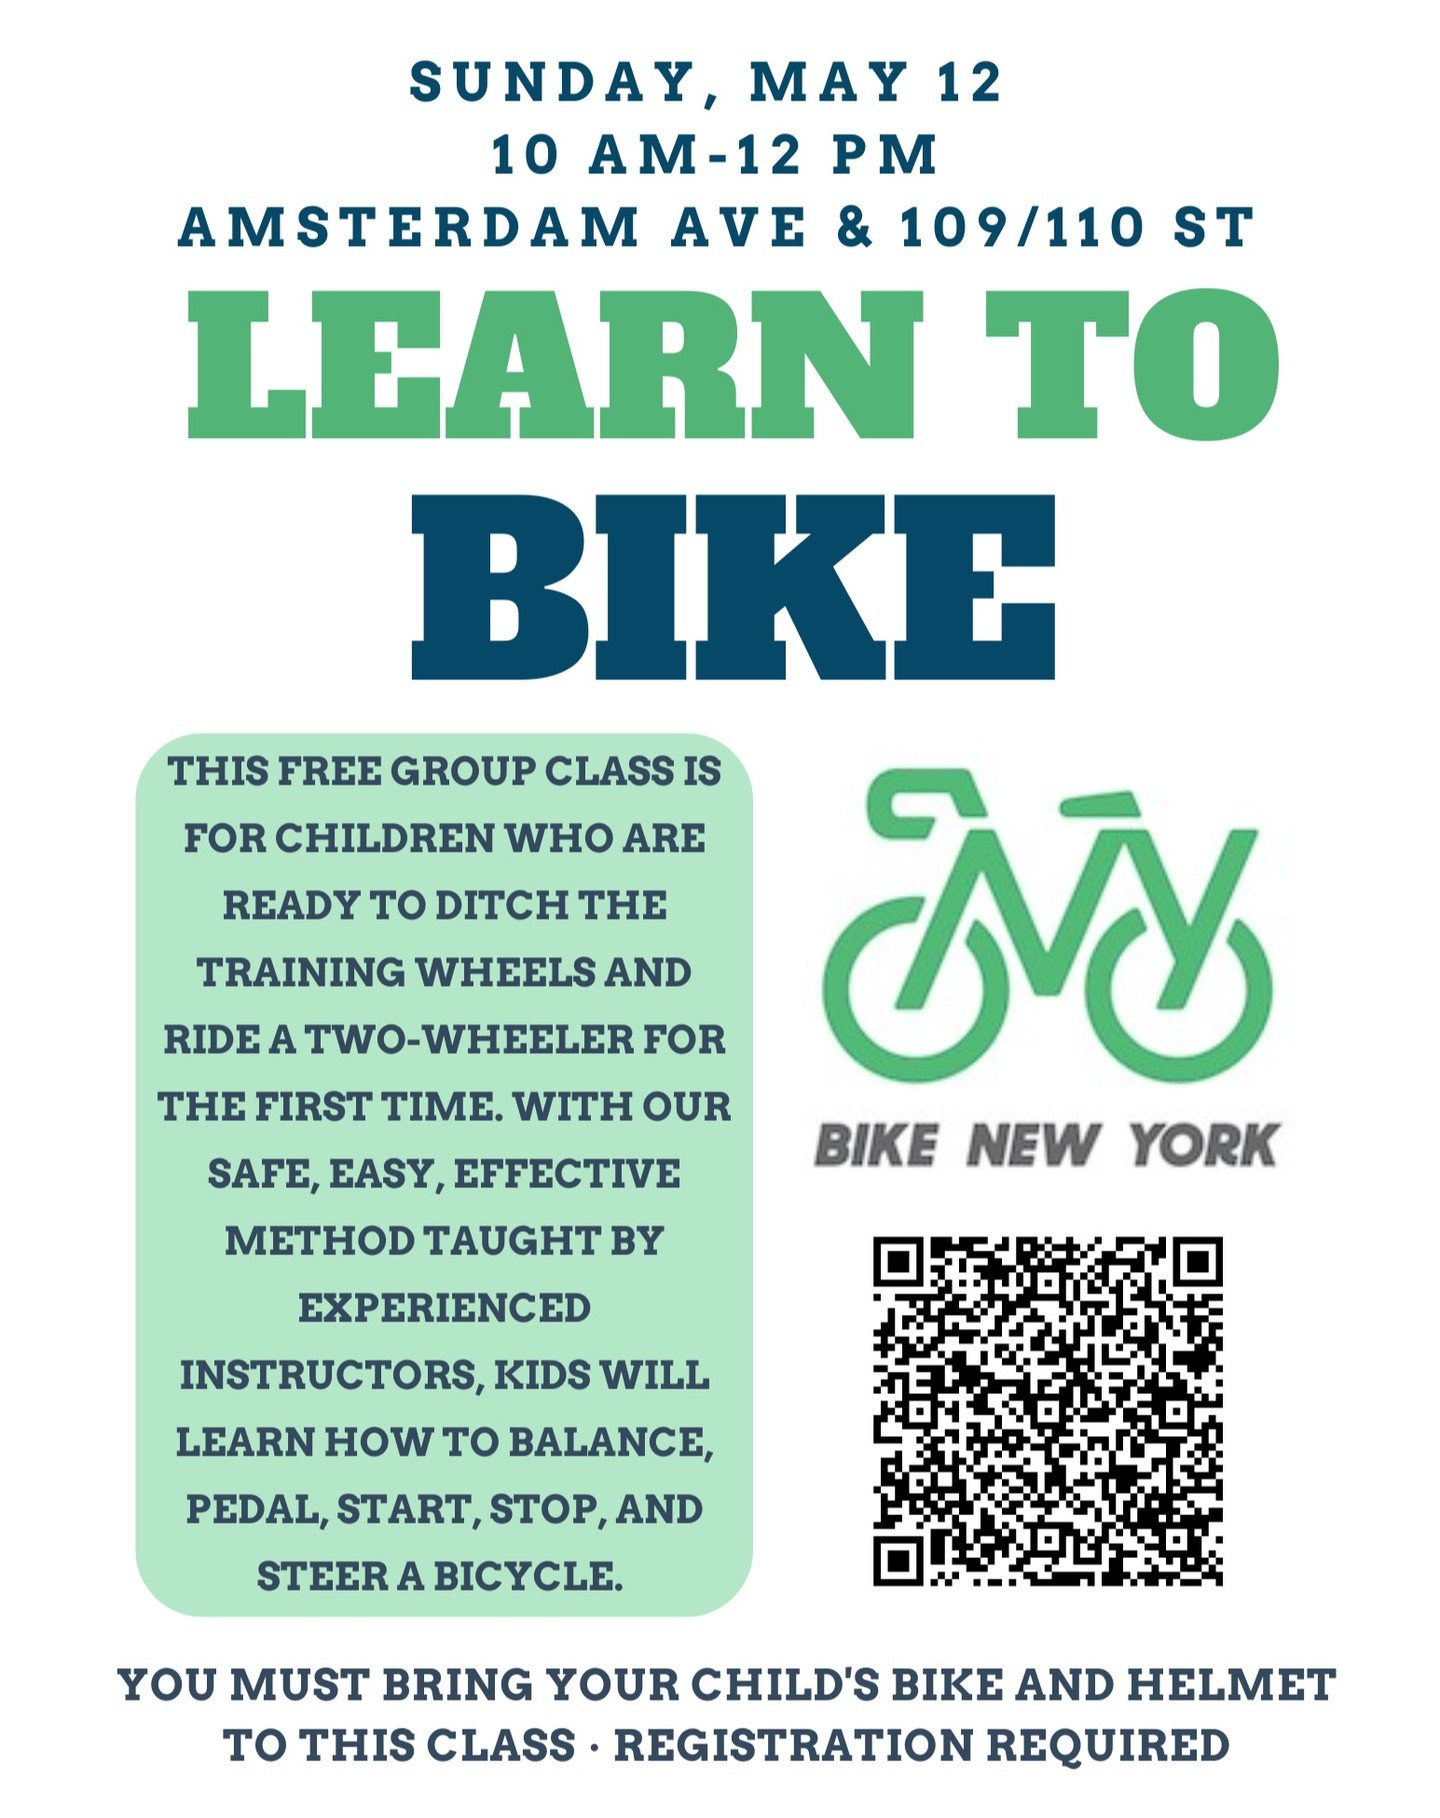 Bike New York returns to Open Streets this Sunday! This is a perfect class for beginners, we had so much fun with them last year and cannot wait to bring this workshop back to the neighborhood! 

Register here: https://bikenewyork.enmotive.com/events